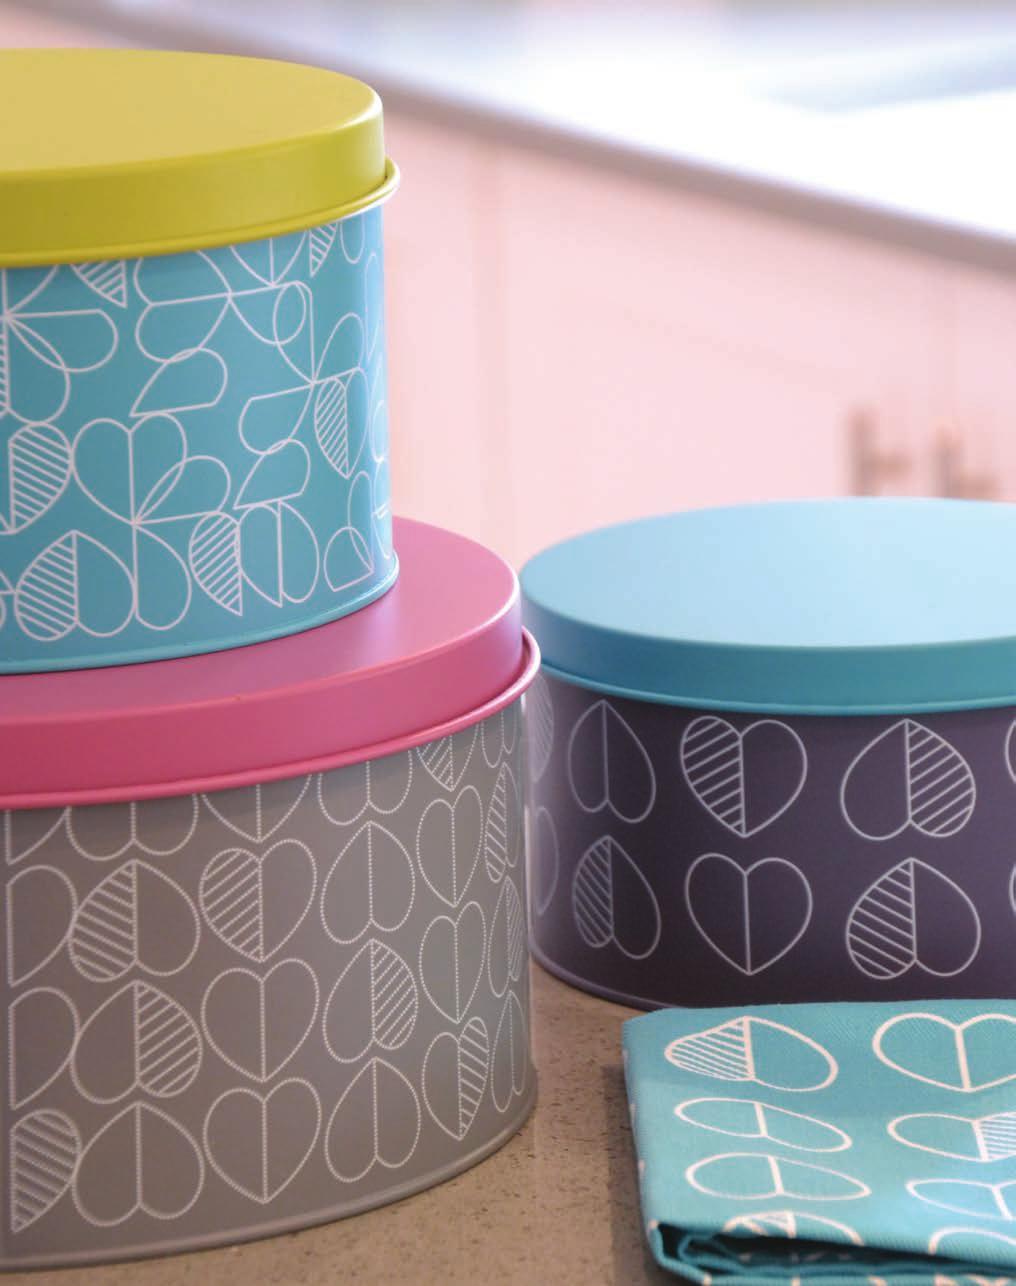 Confetti Outline Textiles and tins U rban style elegance with a pop of colour!